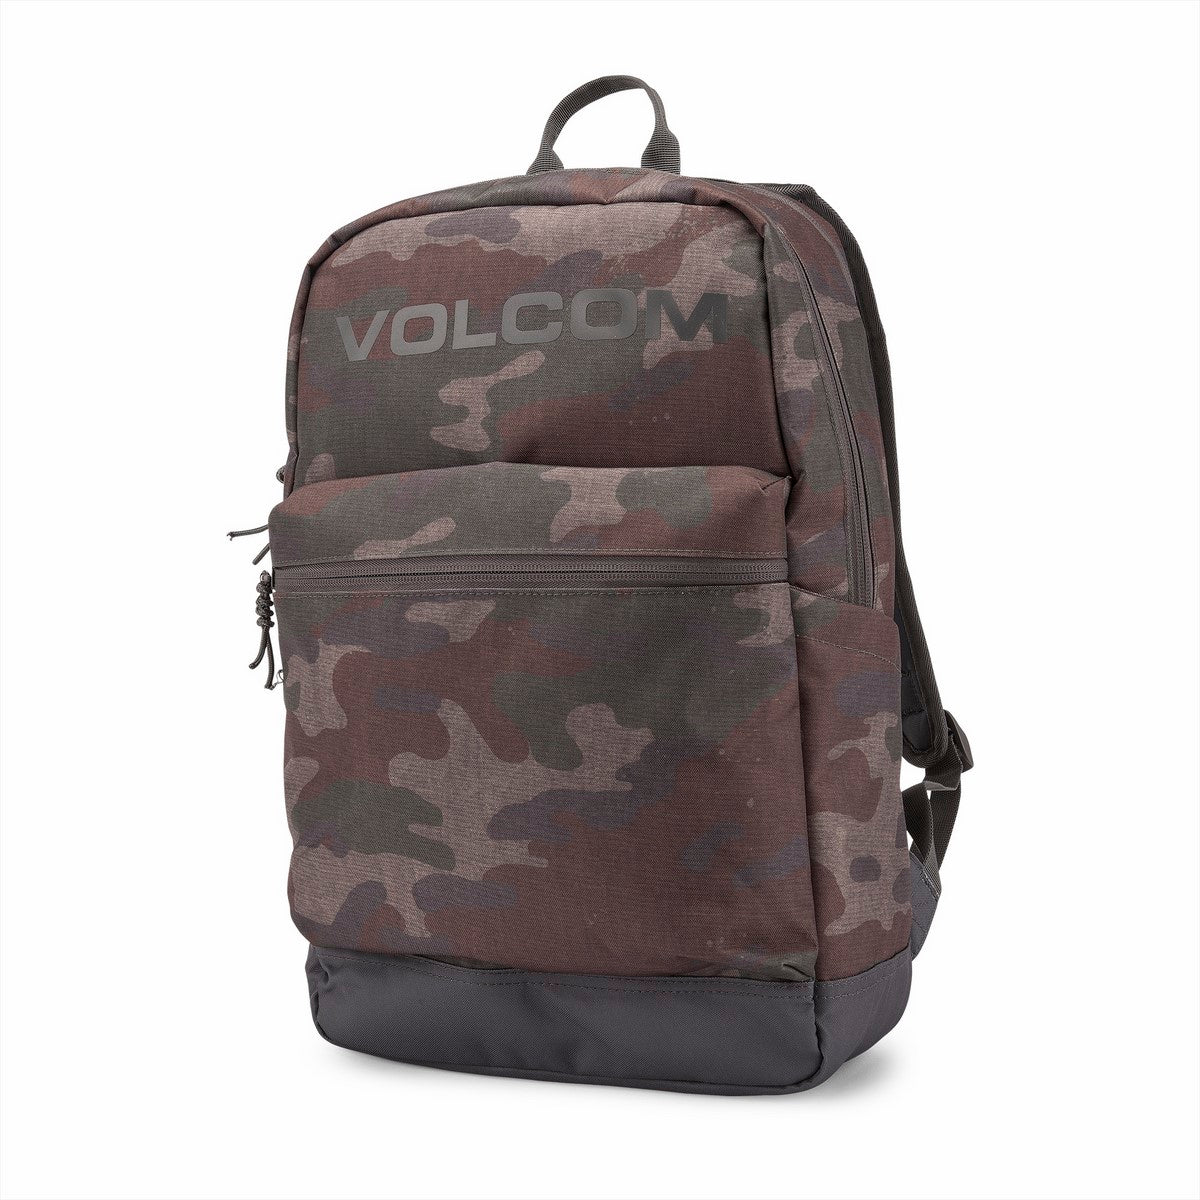 VOLCOM SCHOOL BACKPACK - ARMY GREEN COMBO